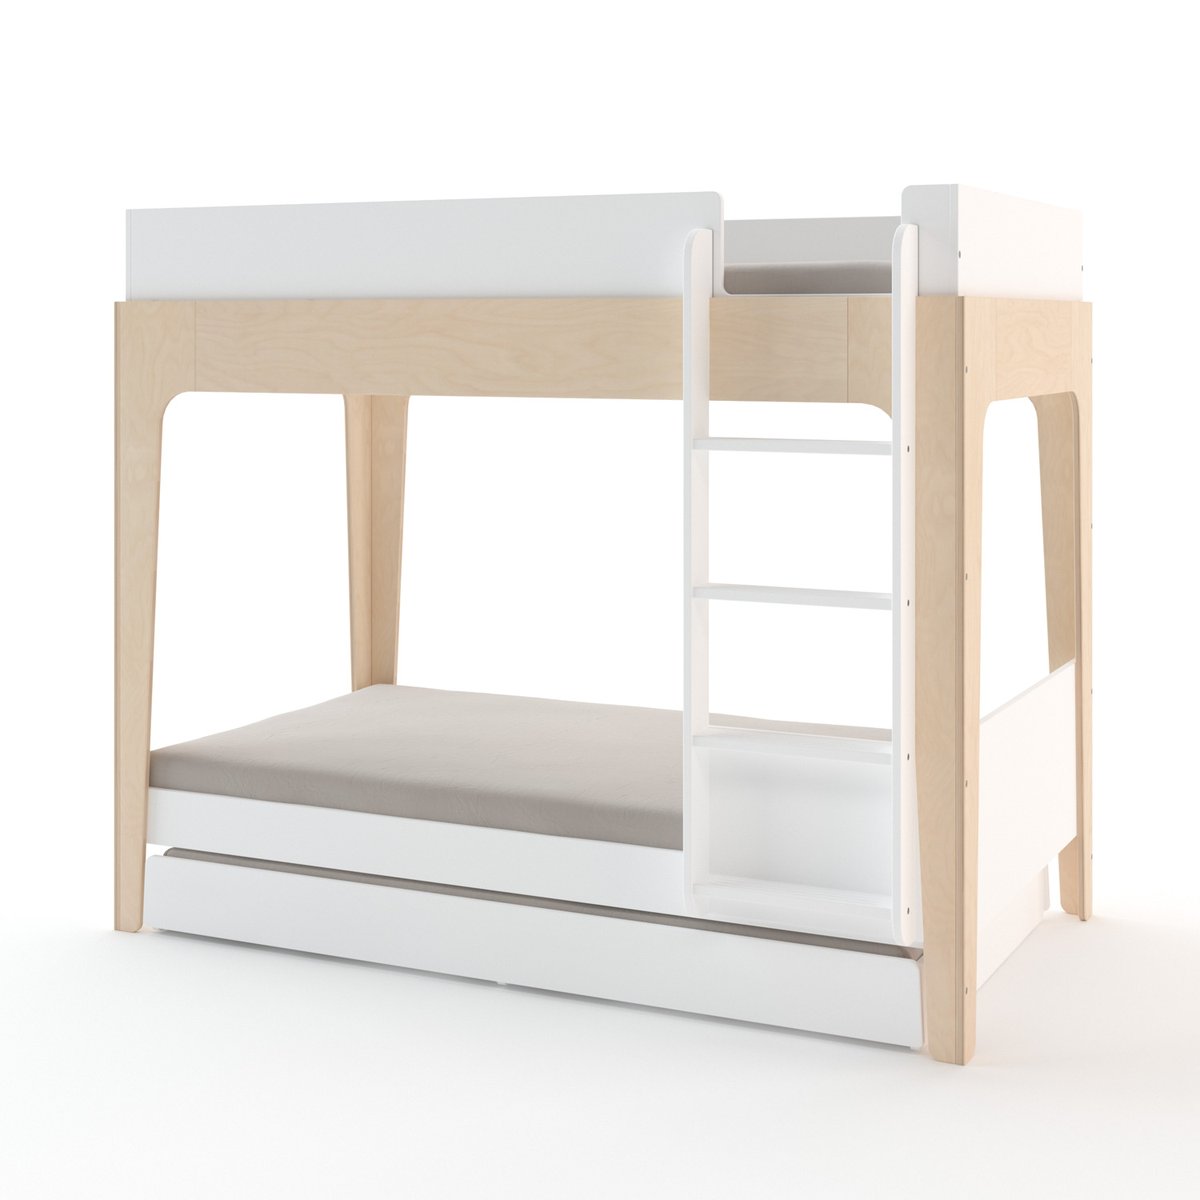 Perch Twin Bunk Bed with Perch Trundle by Oeuf - Maude Kids Decor